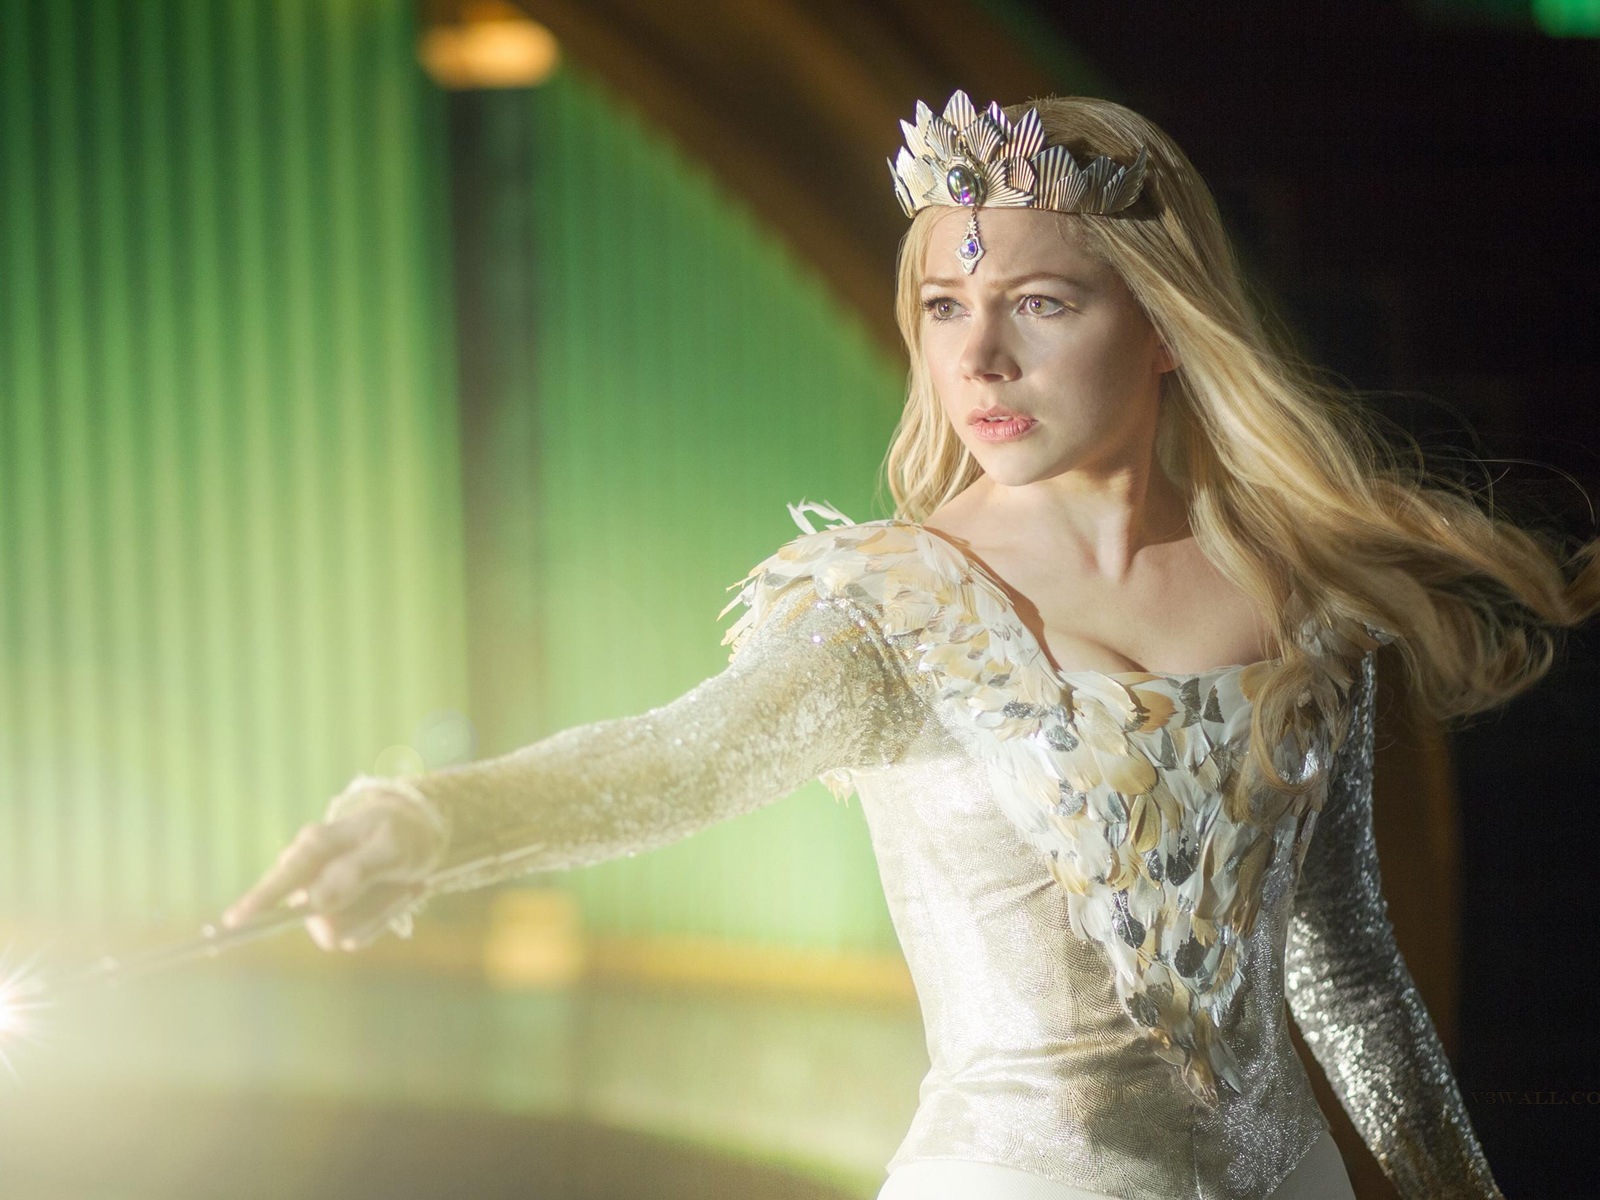 Oz The Great and Powerful 2013 HD wallpapers #5 - 1600x1200